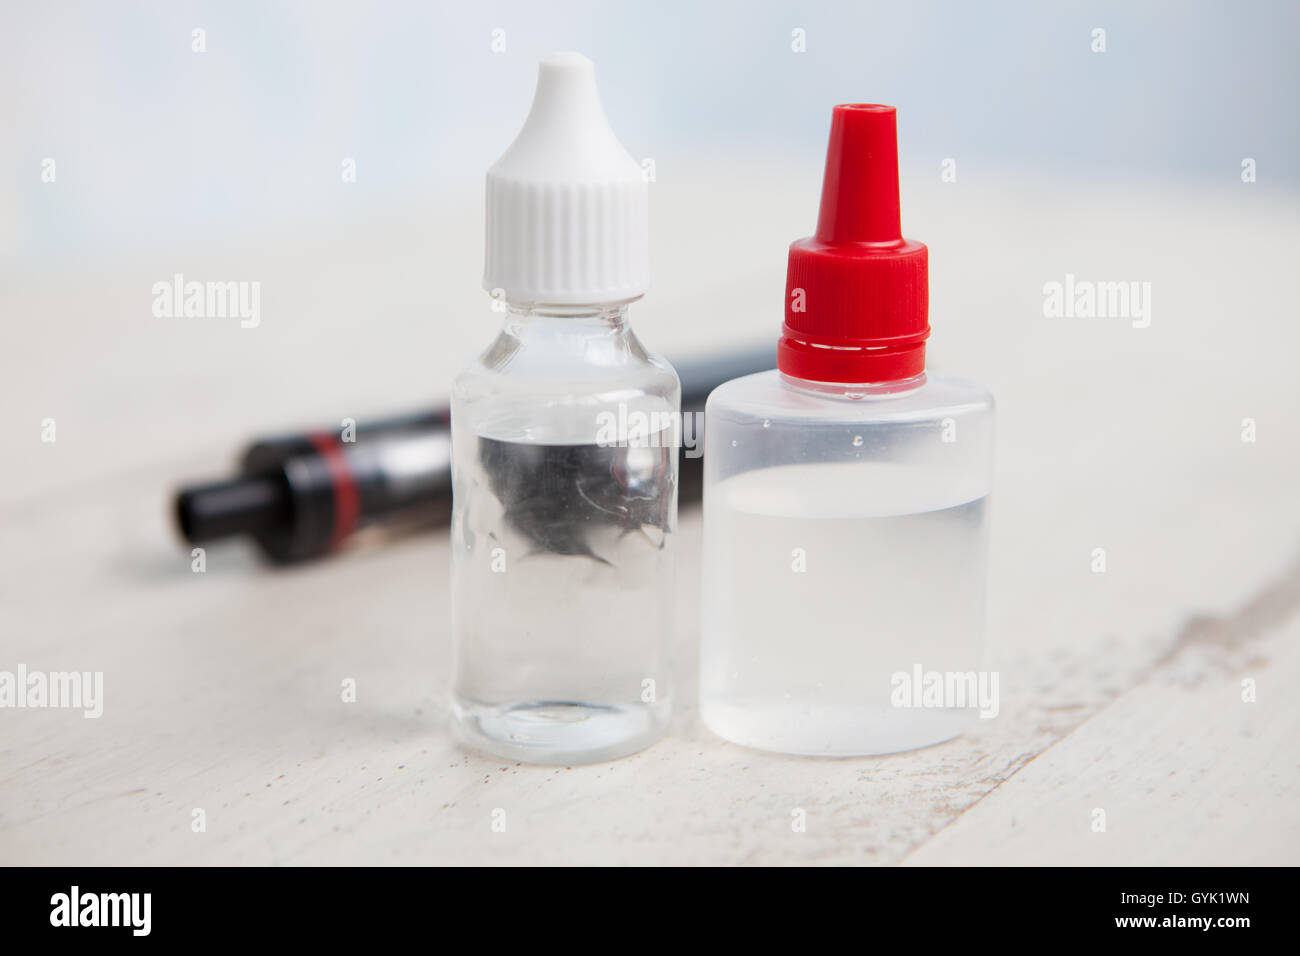 E-juice or e-liquid for vaping device vaporizer.Smoke safely.Refill liquid tobacco with propylen glicol and glycerin base. Place text on transparent bottle. Stock Photo